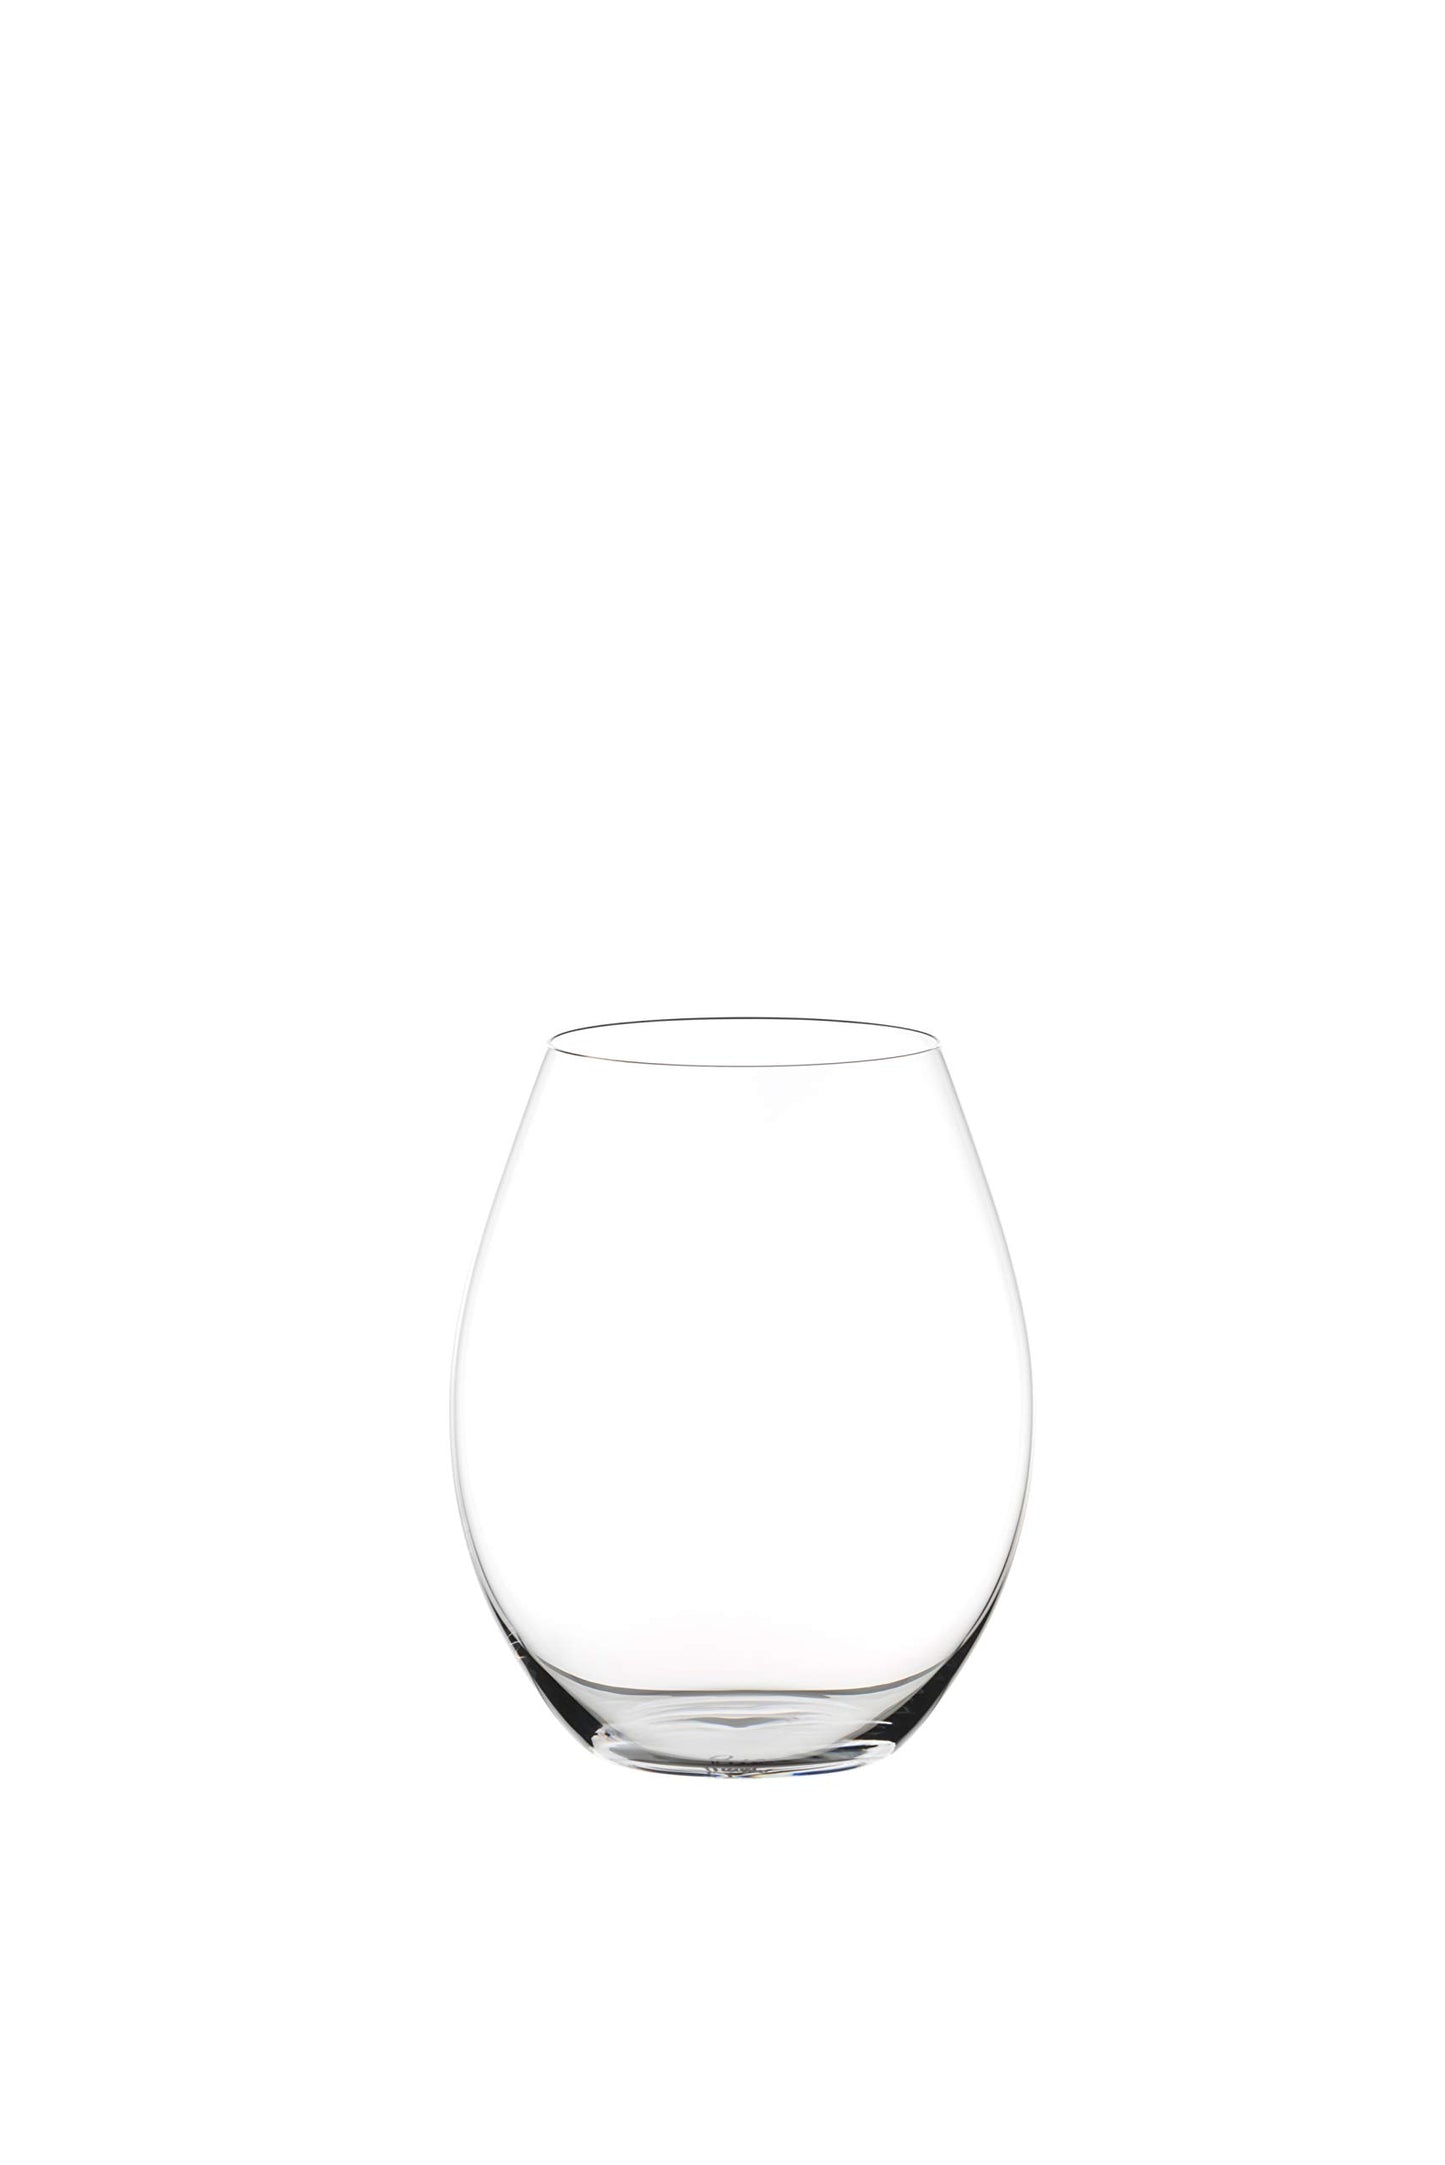 Riedel 00 Collection 004 Tumbler Glasses, Set of 4, Clear